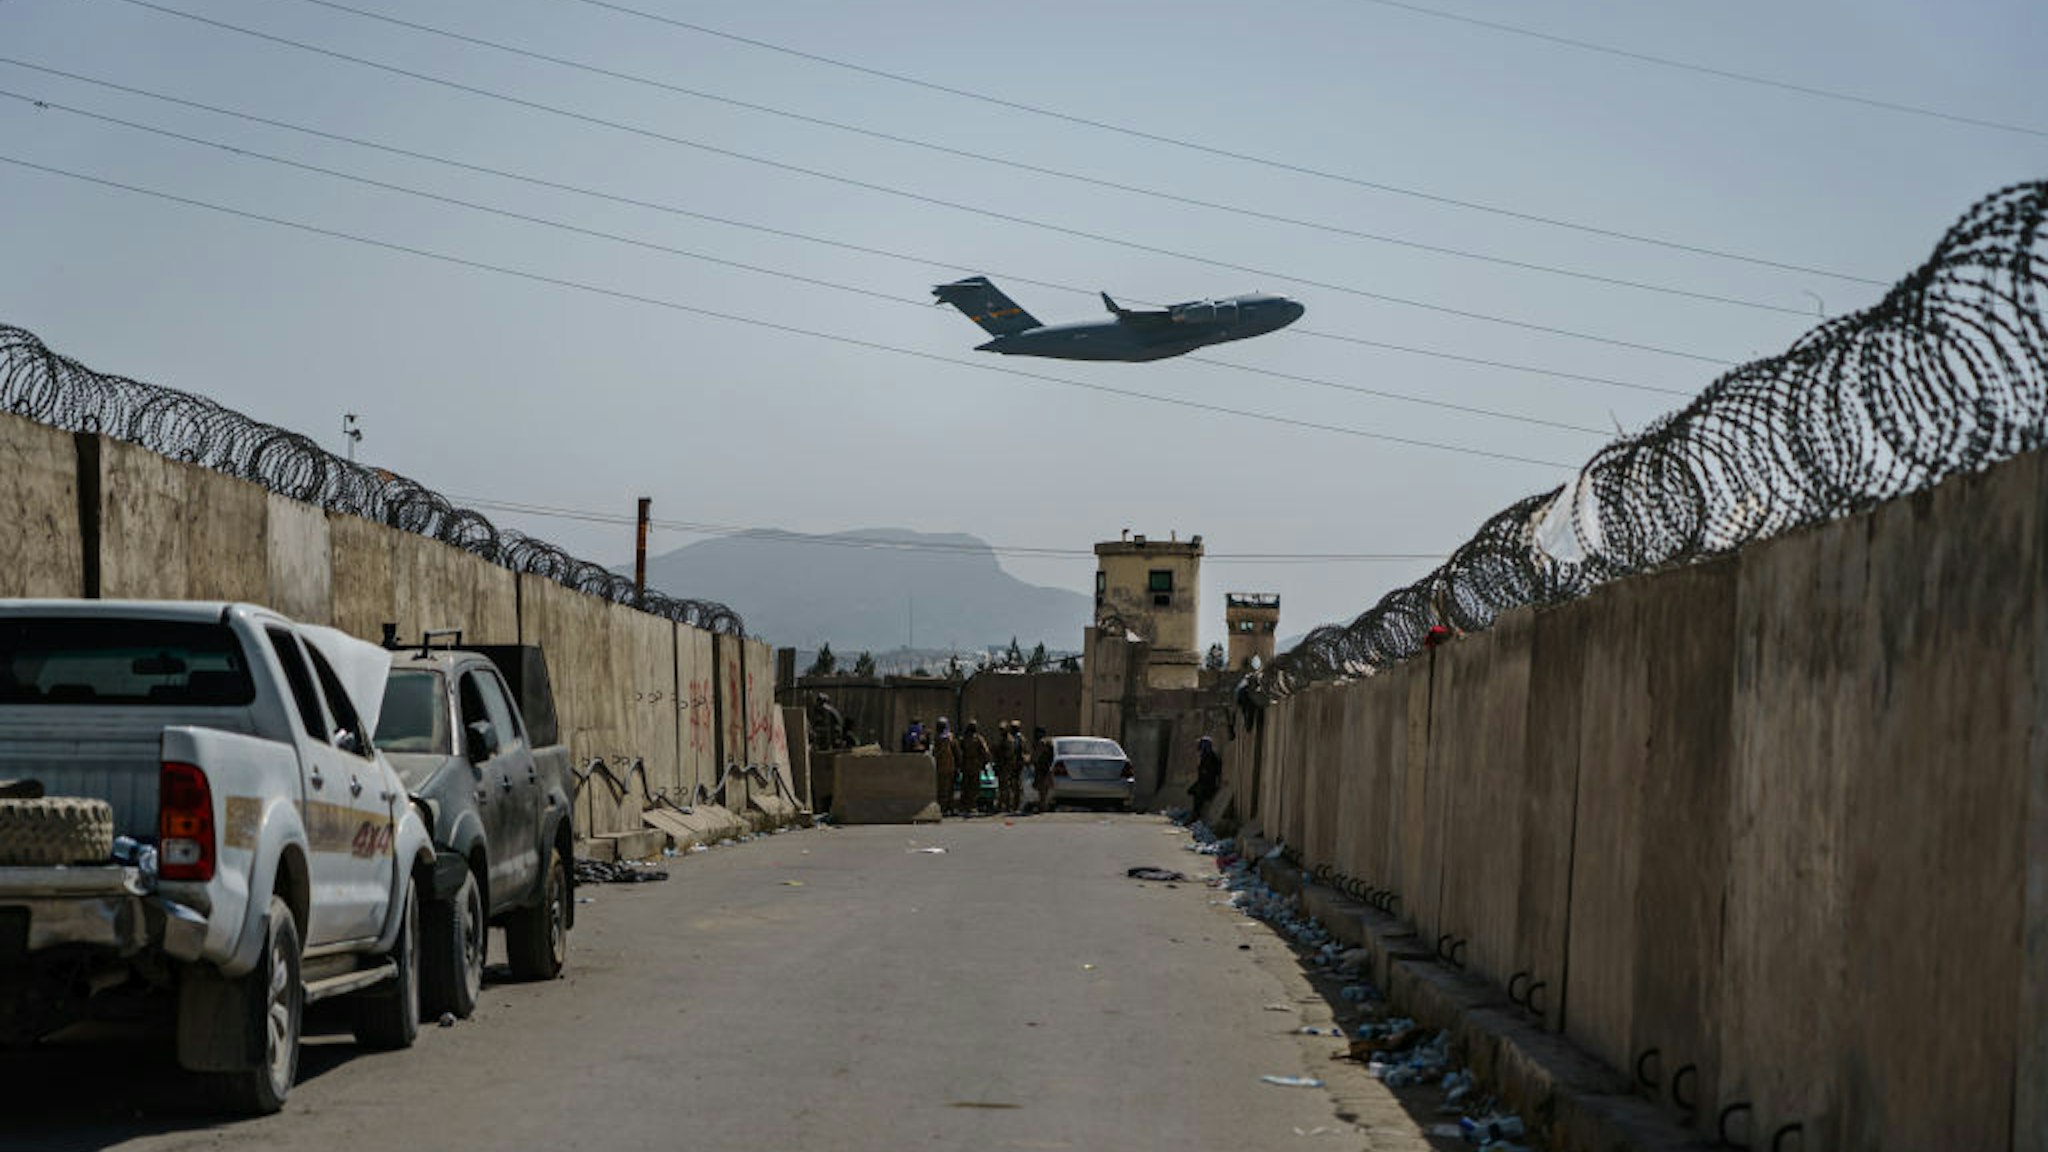 KABUL, AFGHANISTAN -- AUGUST 29, 2021: A C-17 Globemaster takes off as Taliban fighters secure the outer perimeter, alongside the American controlled side of of the Hamid Karzai International Airport in Kabul, Afghanistan, Sunday, Aug. 29, 2021. (MARCUS YAM / LOS ANGELES TIMES)